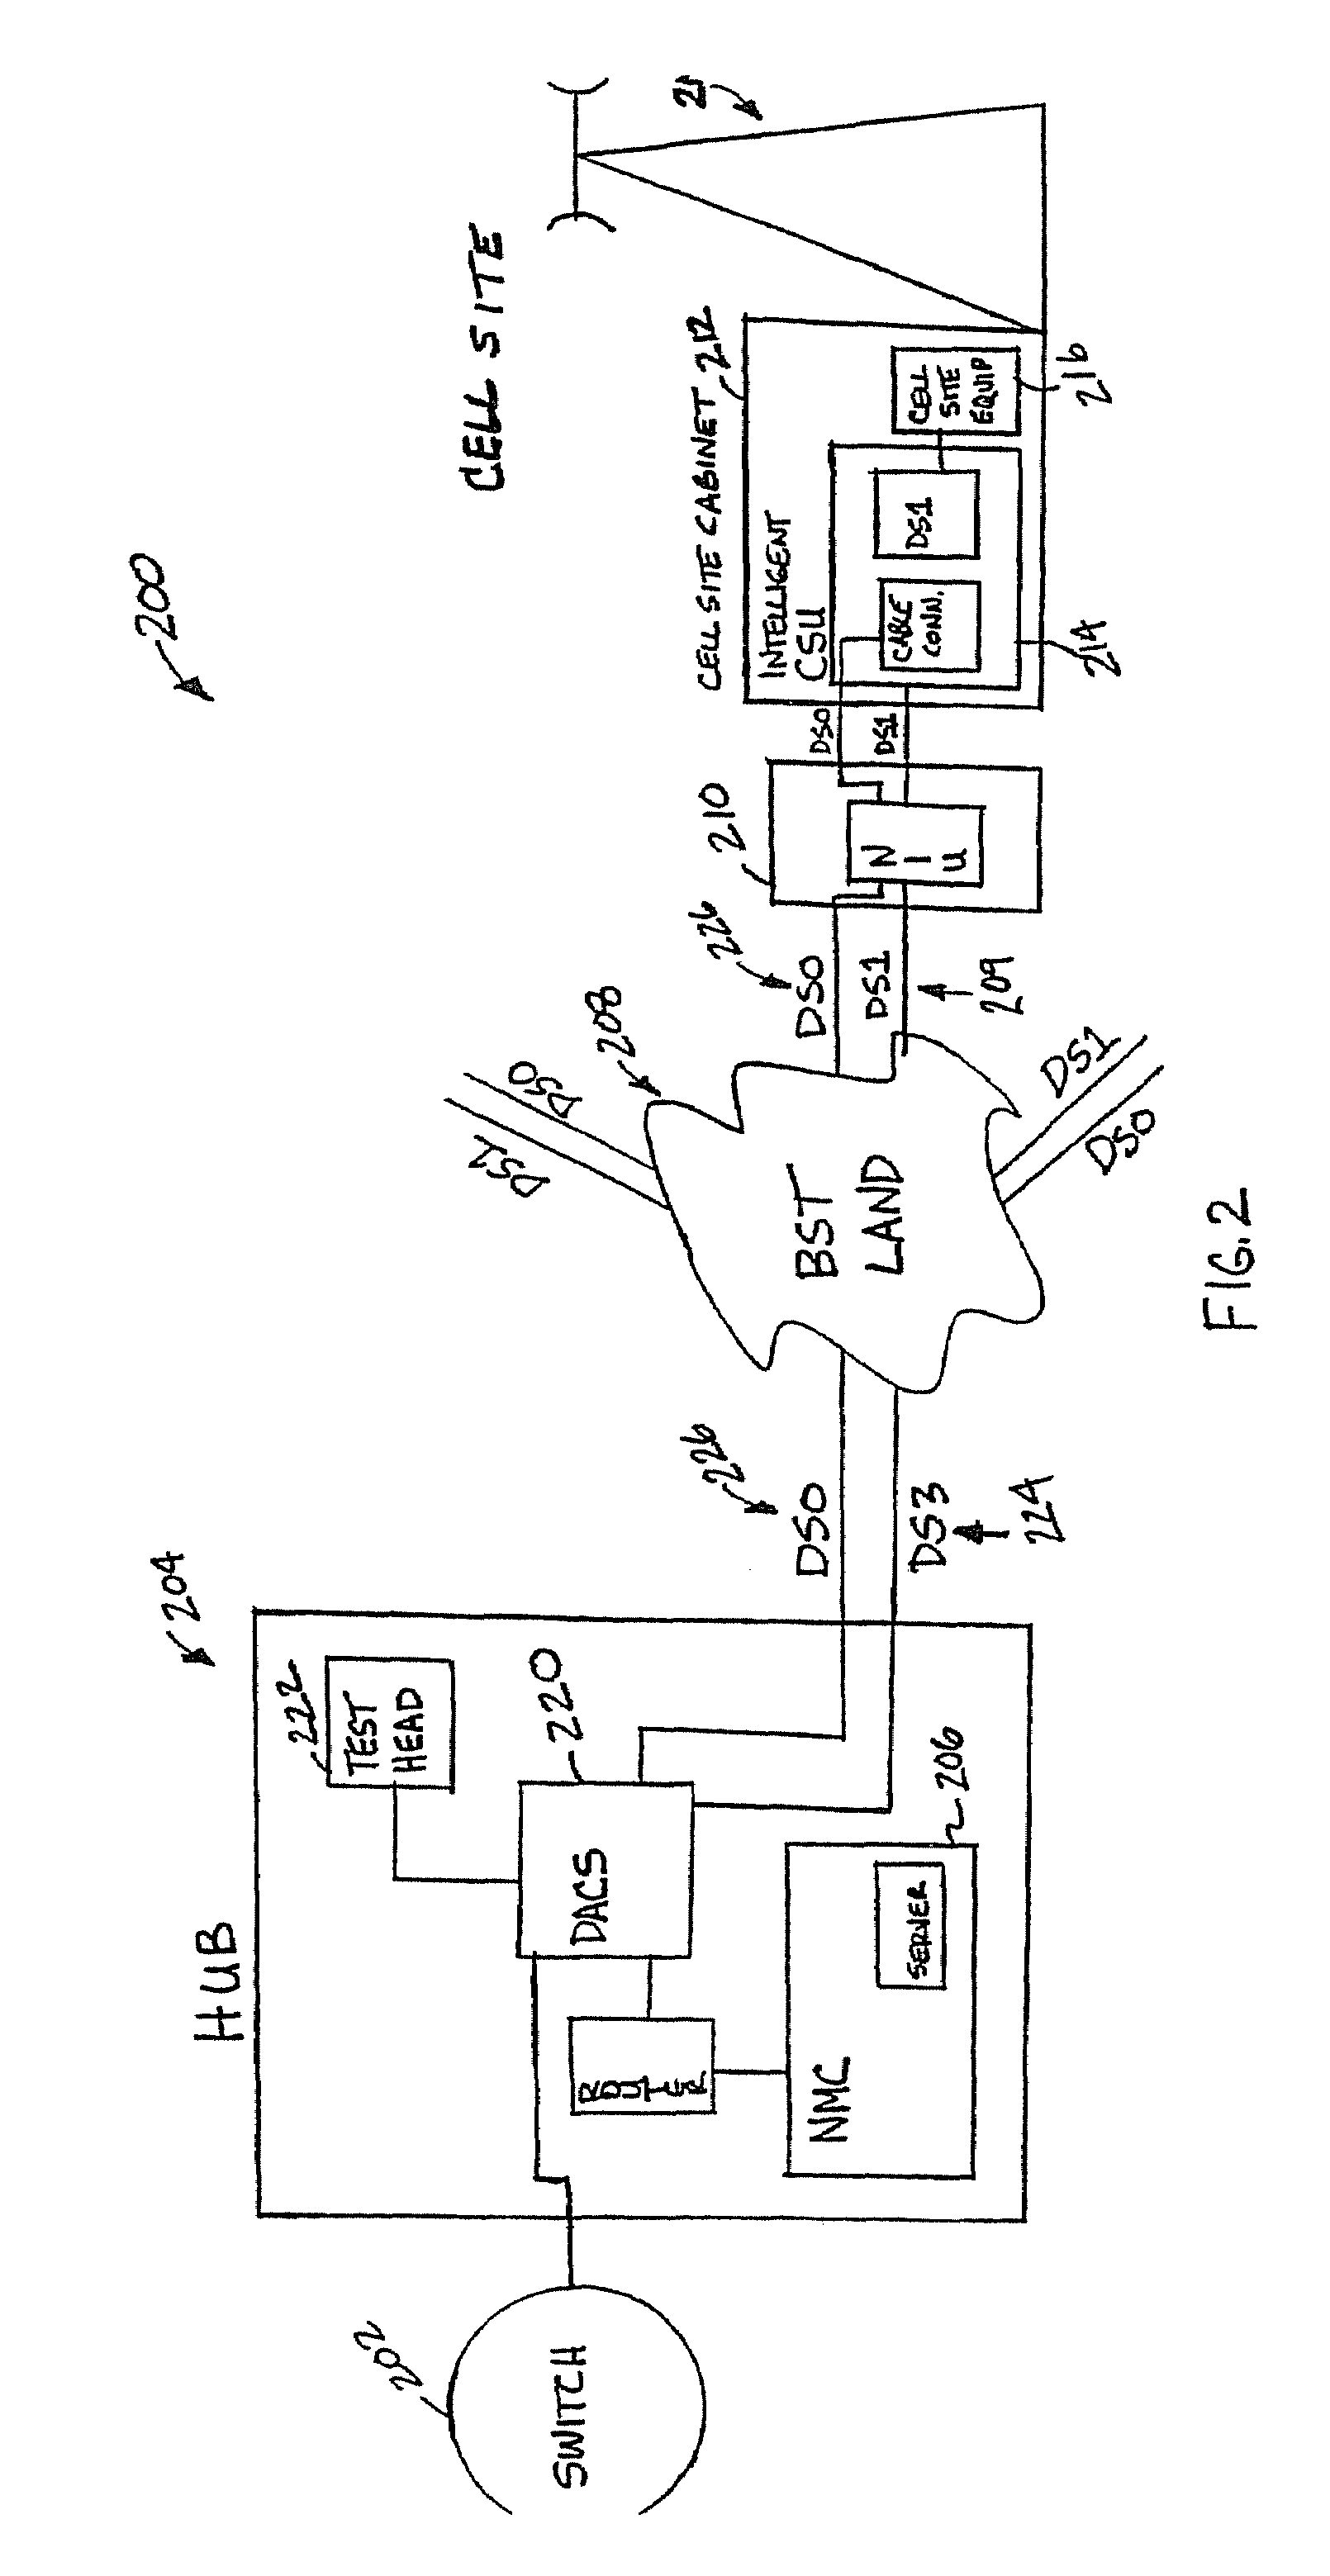 Remote testing and monitoring to a cell site in a cellular communications network